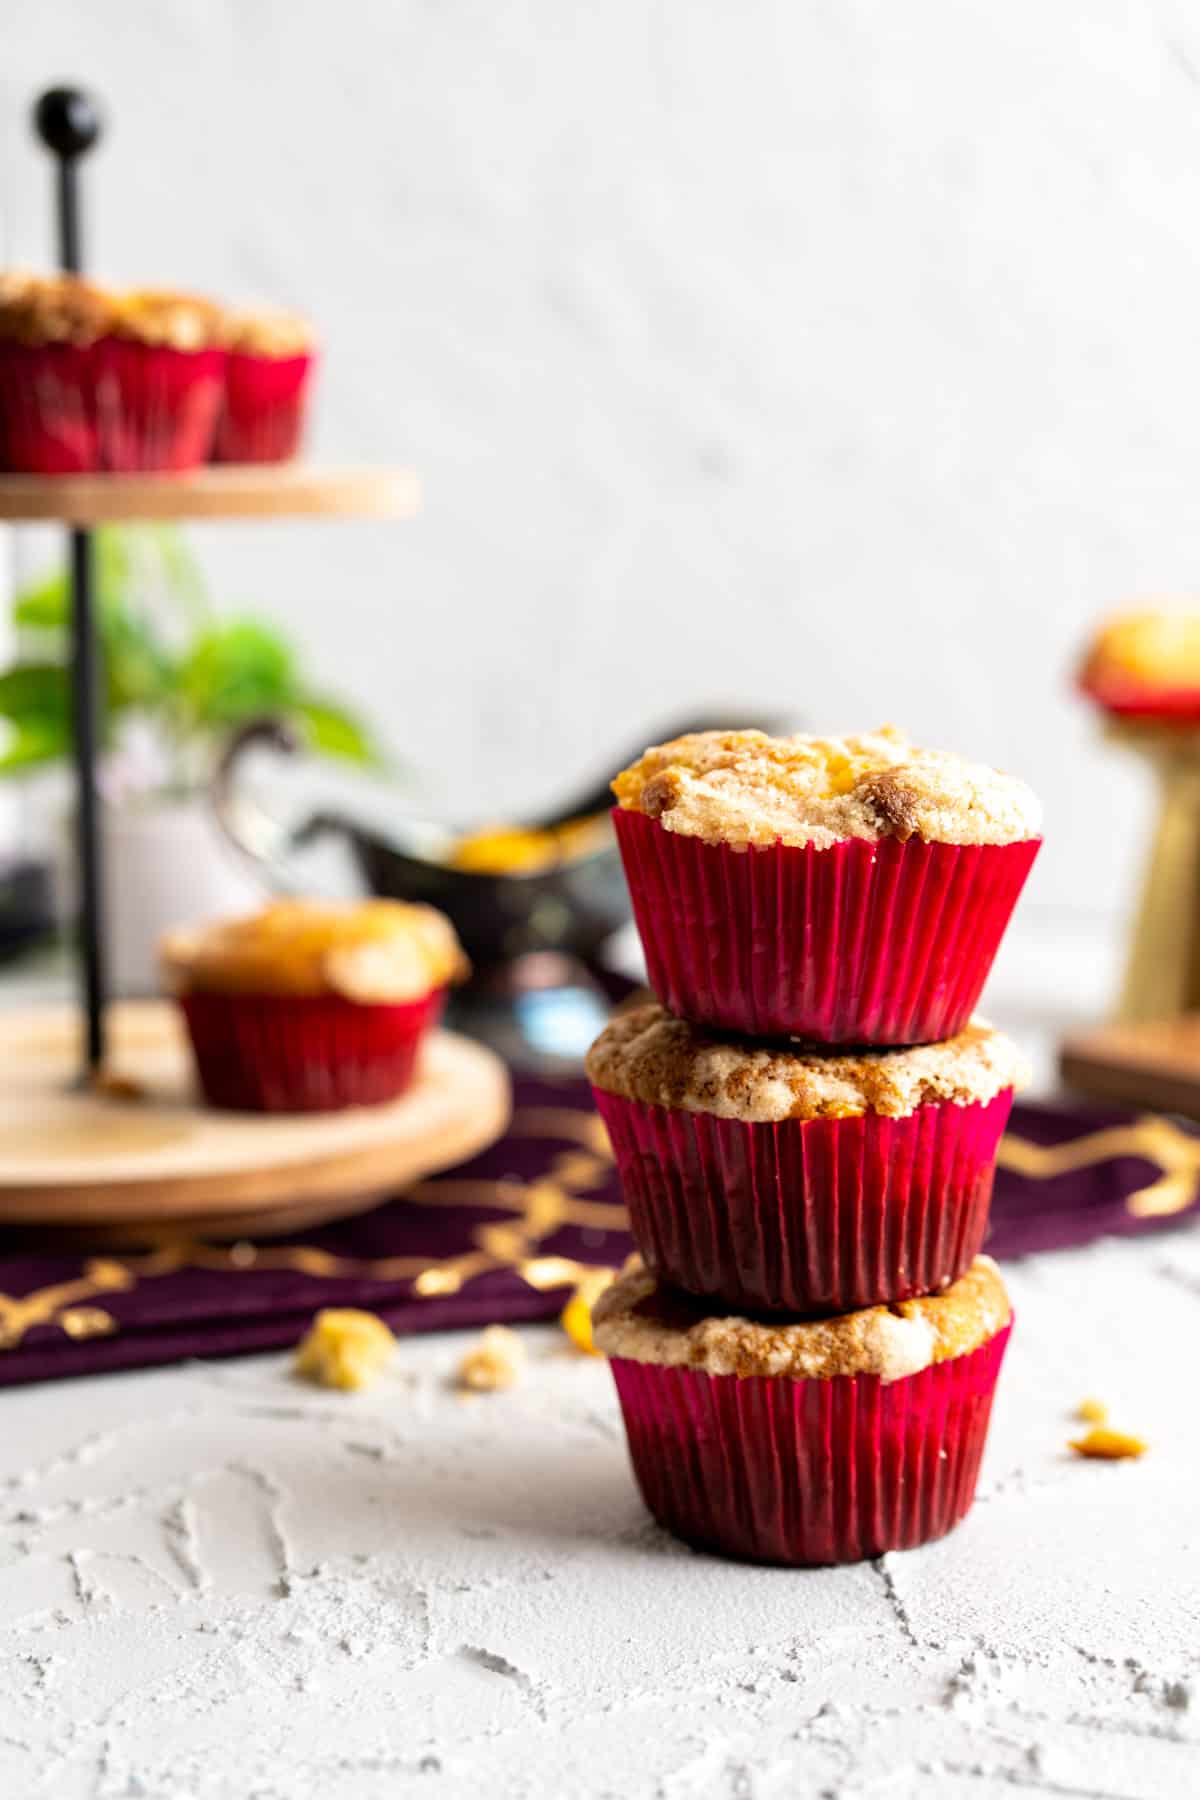 peach cobbler muffins stacked together and a cake stand in the backdrop with more muffins.